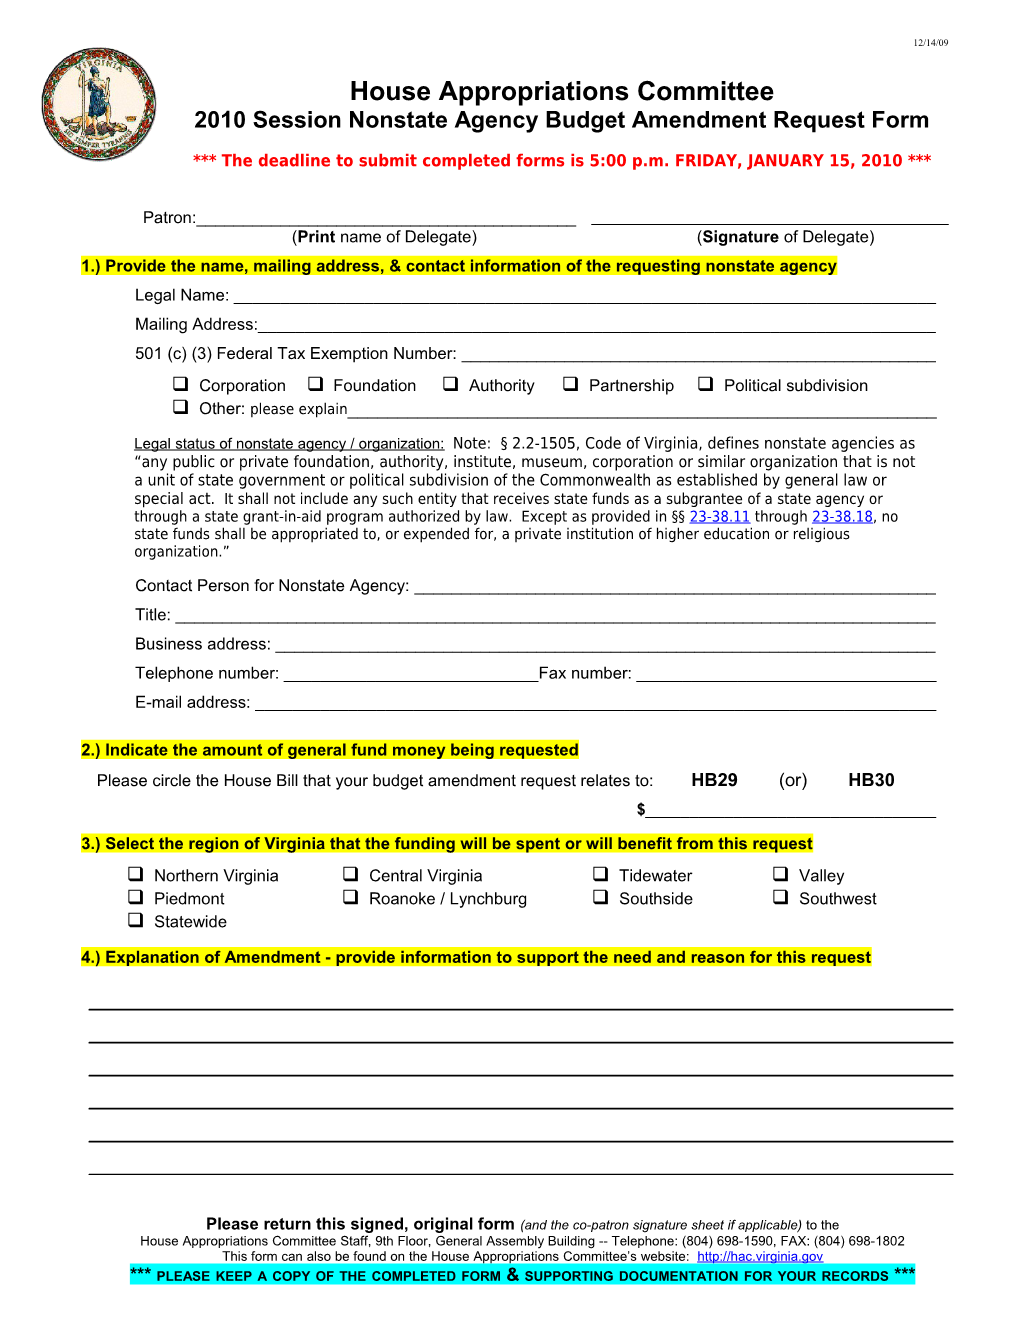 2010 Session Nonstate Agency Budget Amendment Request Form